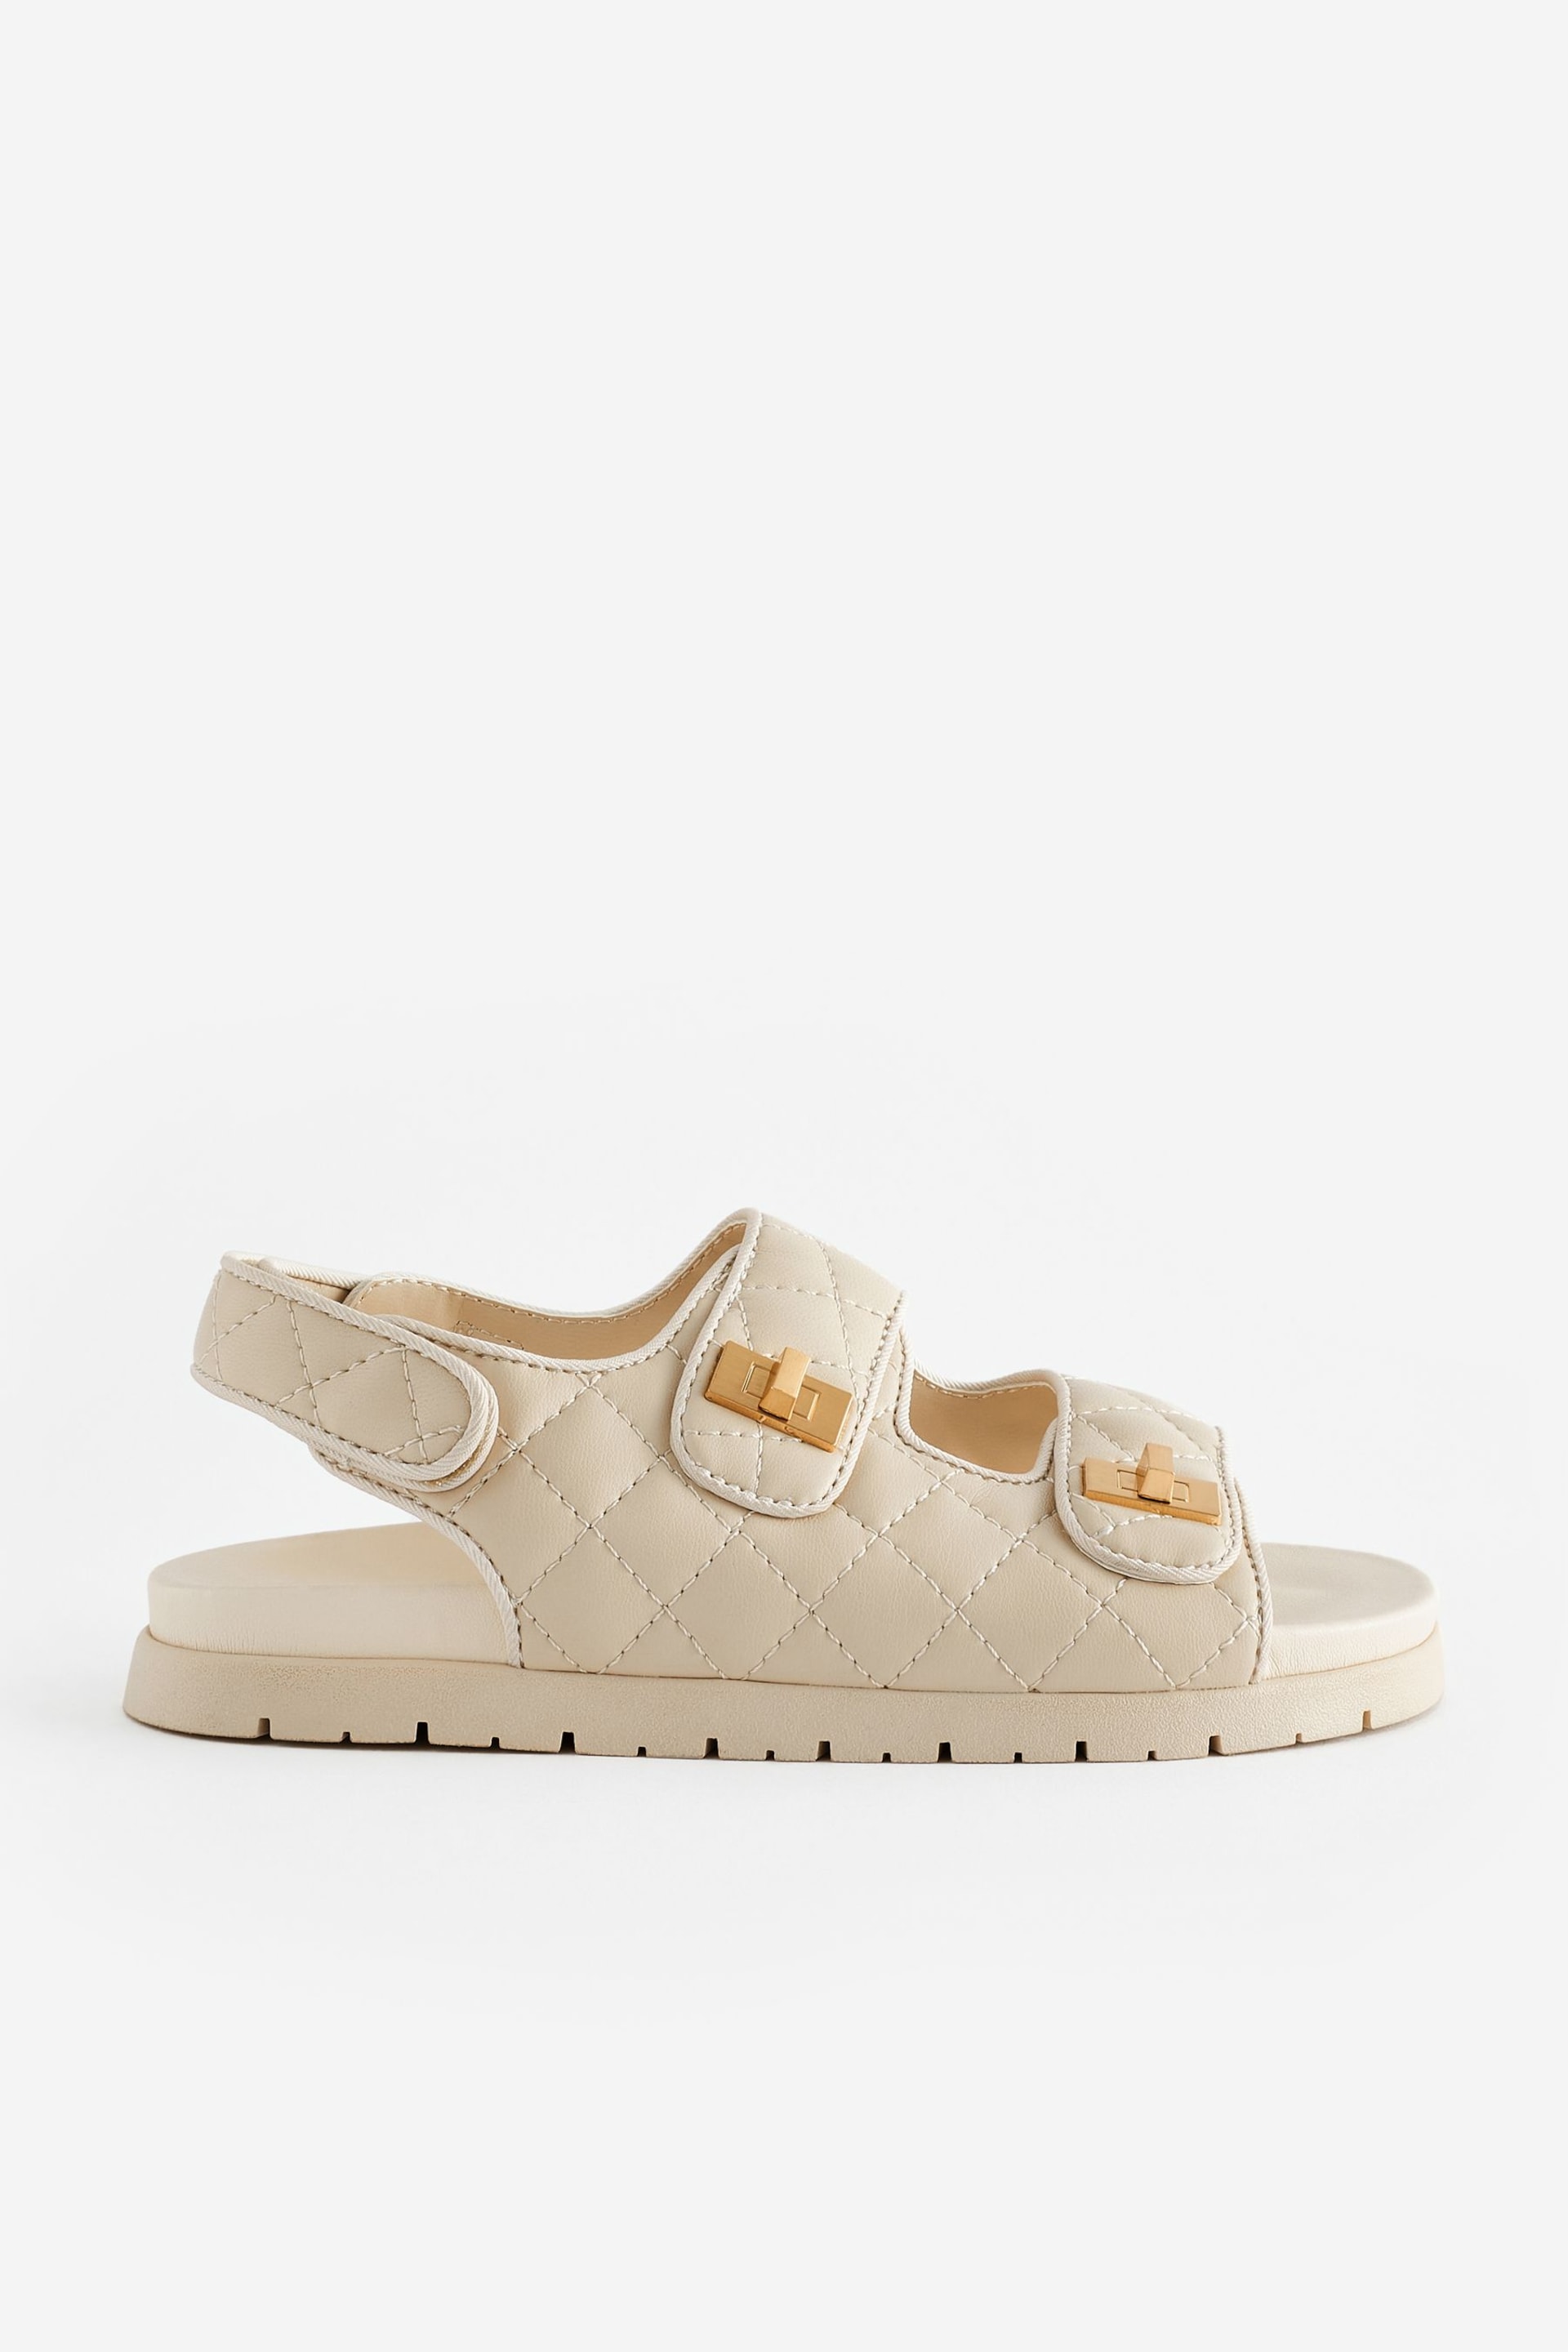 Neutral Cream Two Strap Quilted Sandals - Image 2 of 6